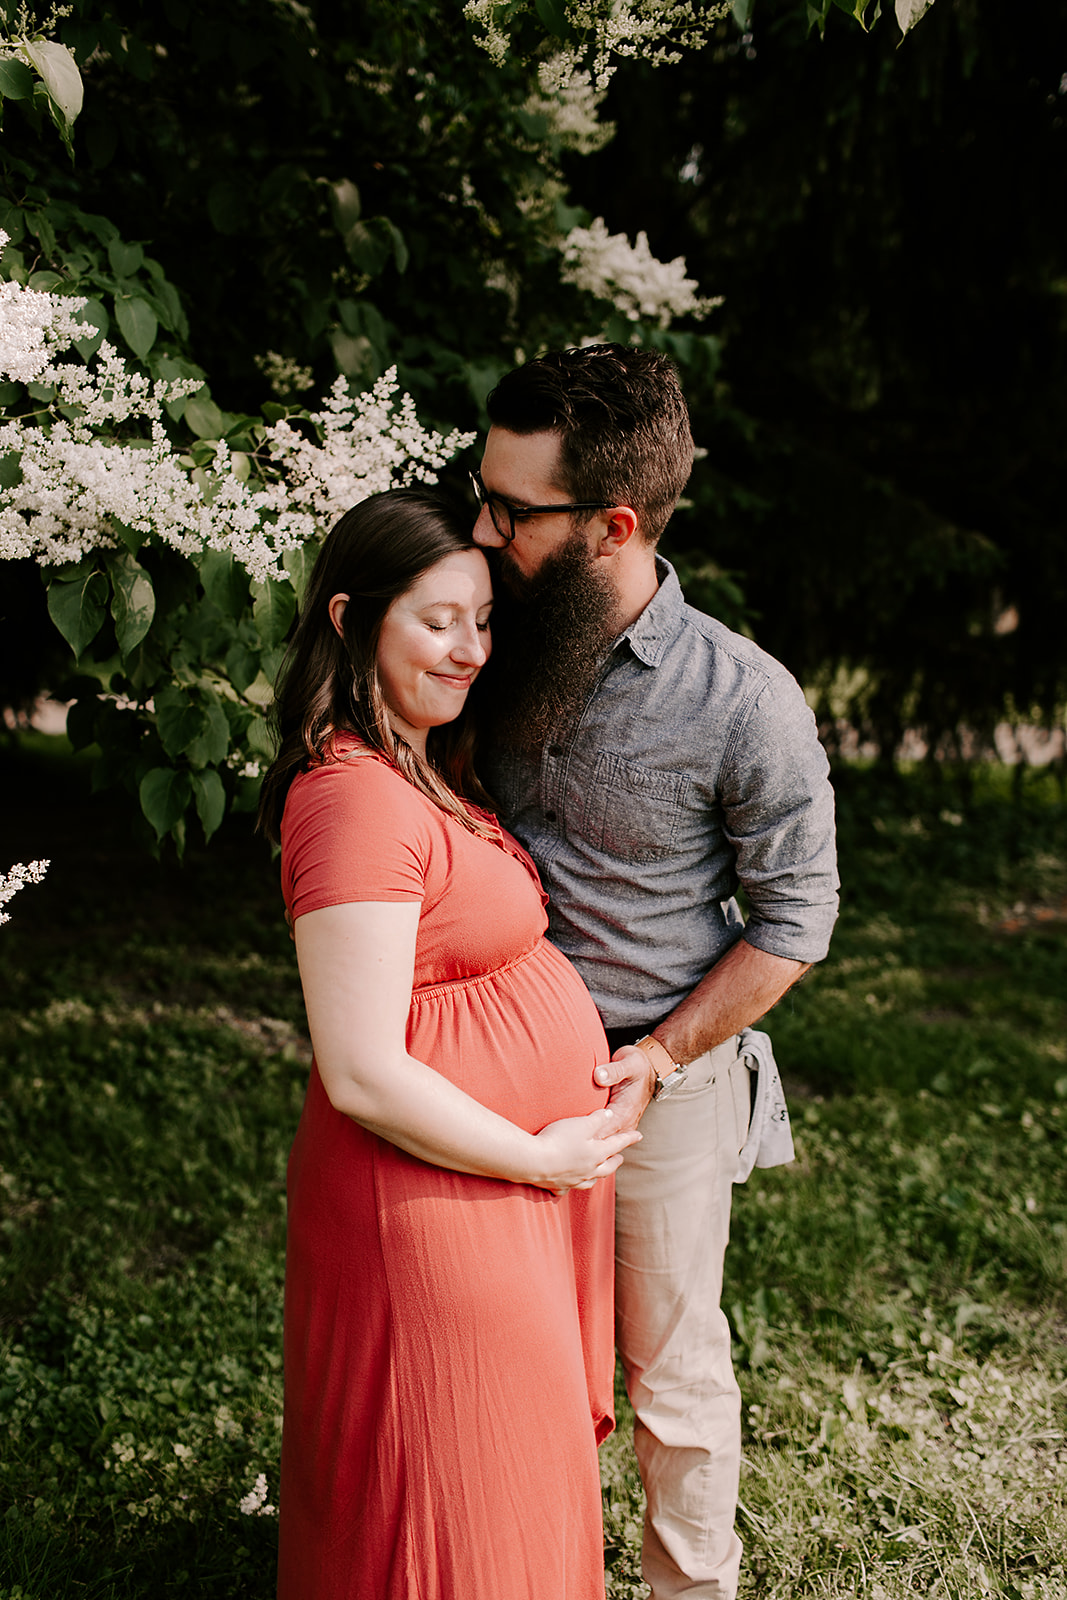 Outdoor maternity session in Indianapolis, Indiana | Photography by Emily Elyse Wehner